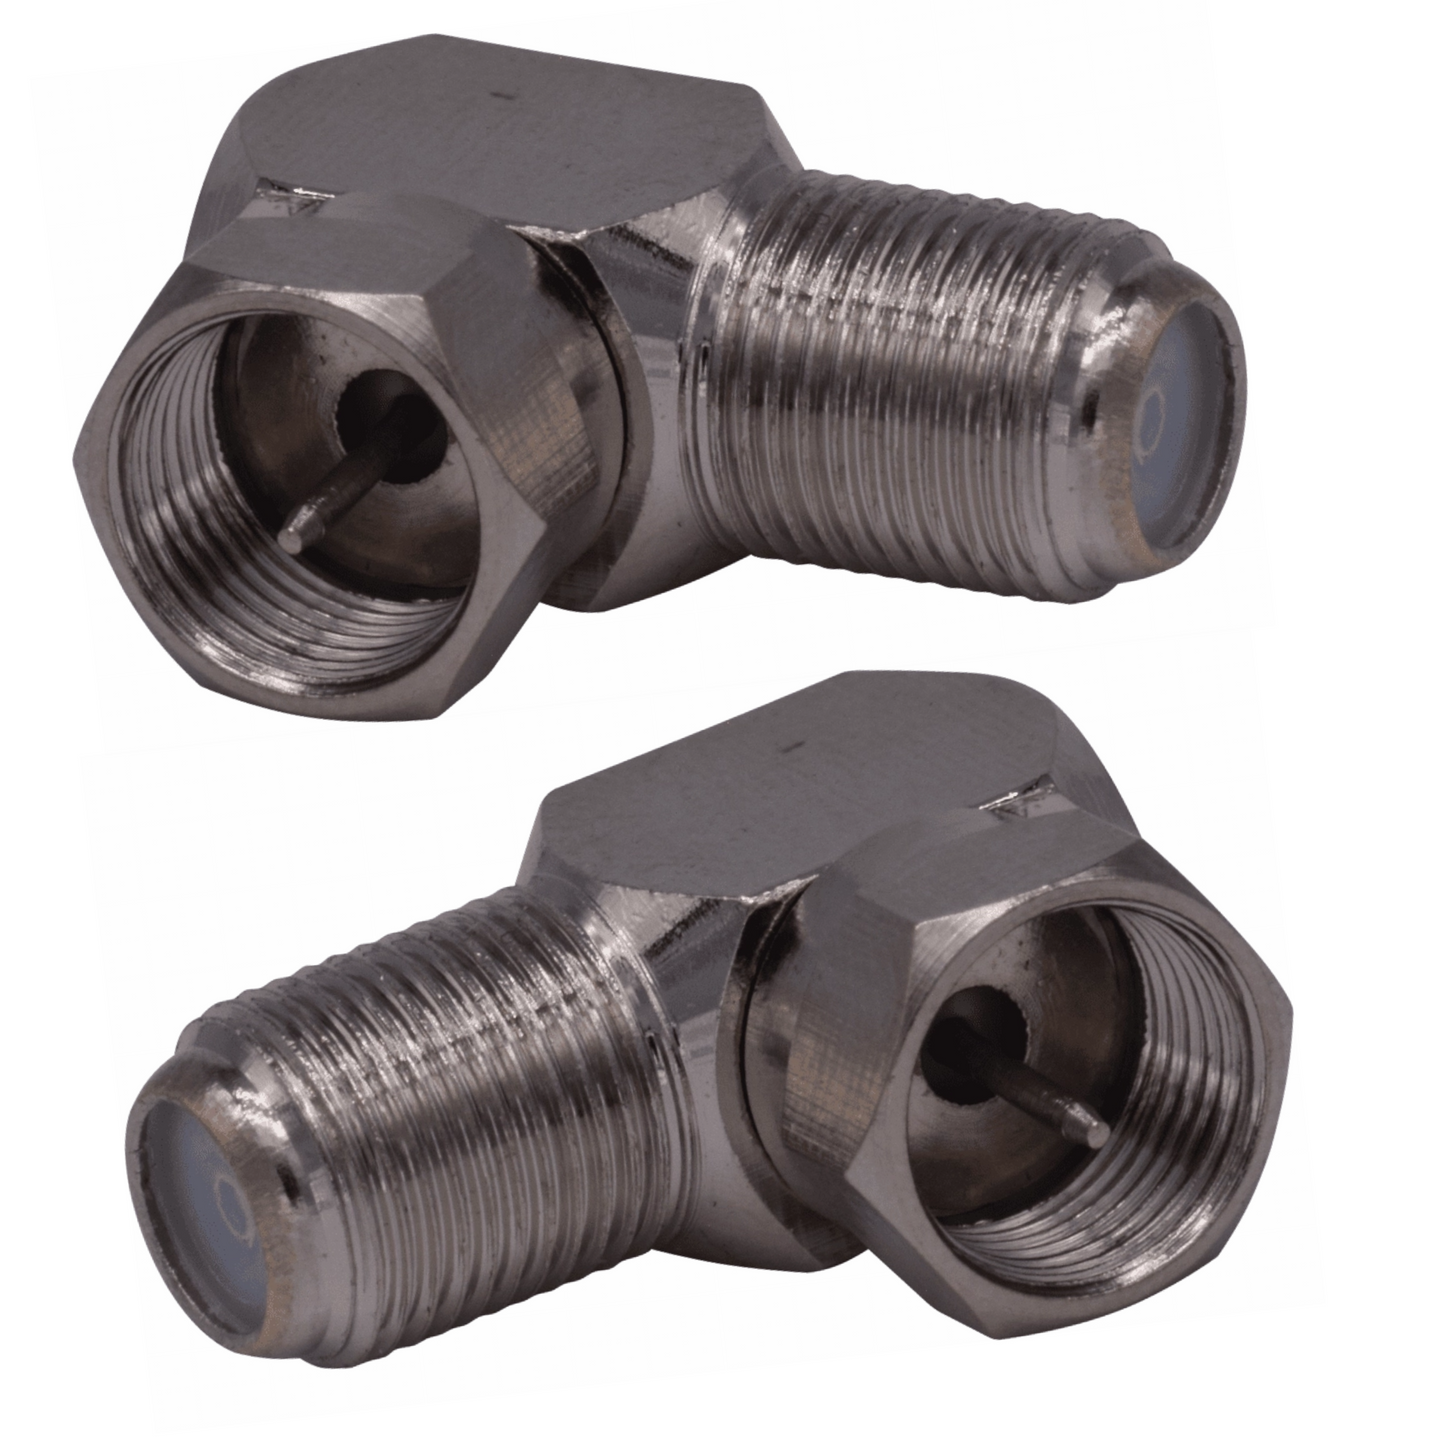 2-Pack Right Angled F Connector: Male to Female Adapter